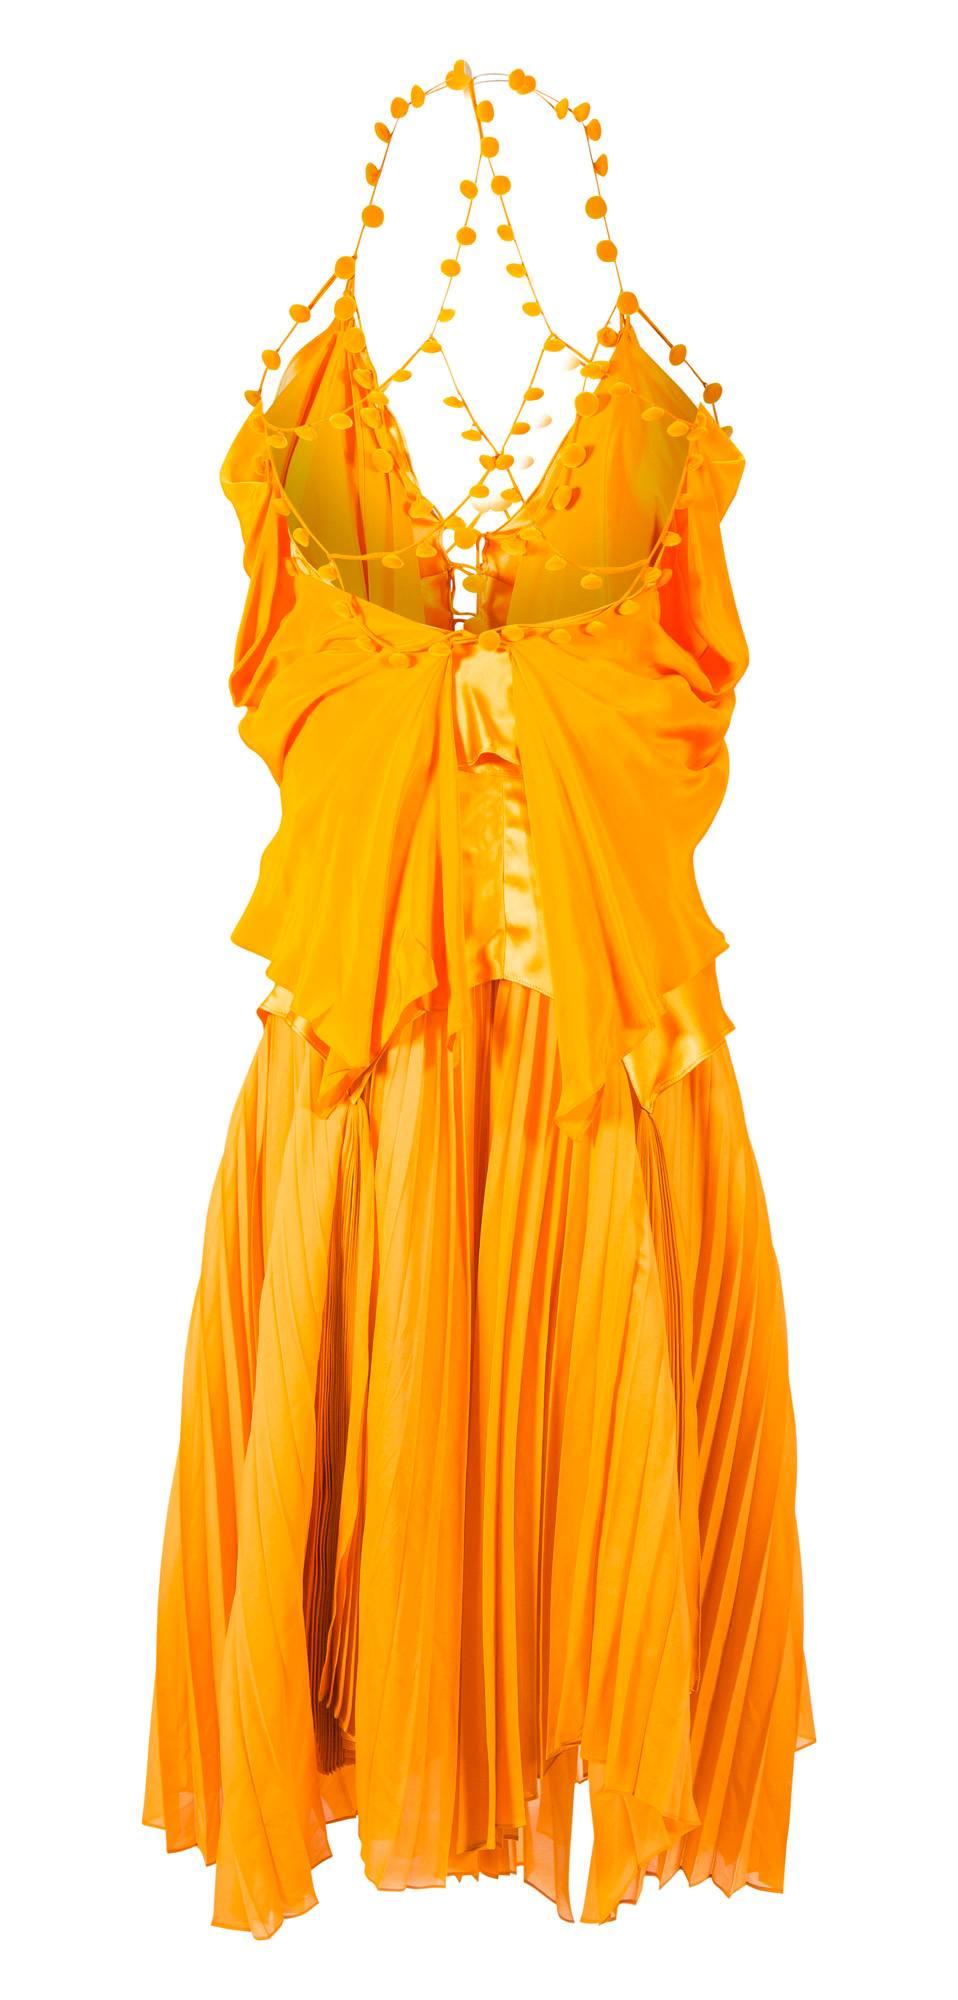 Tom Ford for Yves Saint Laurent at Paris Fashion Week Spring 2004 
Orange silk top and skirt
Top has silk chiffon and silk satin top with velvet buttons
Skirt has long sashes with knife pleats
New without tags - perfect condition
FR38